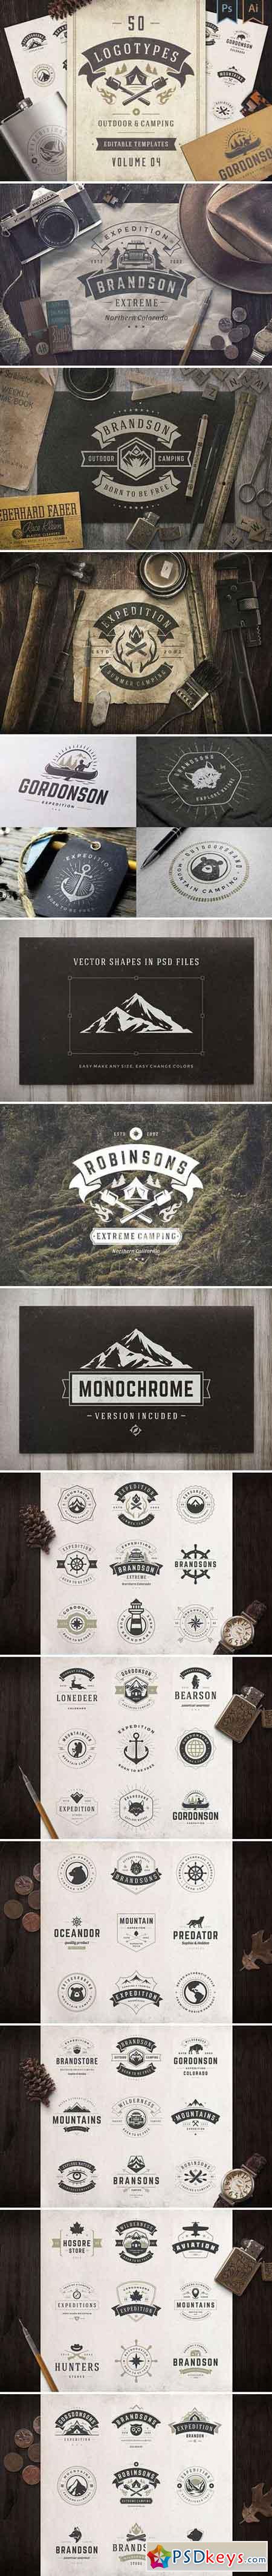 50 Outdoor logos and badges 2202133